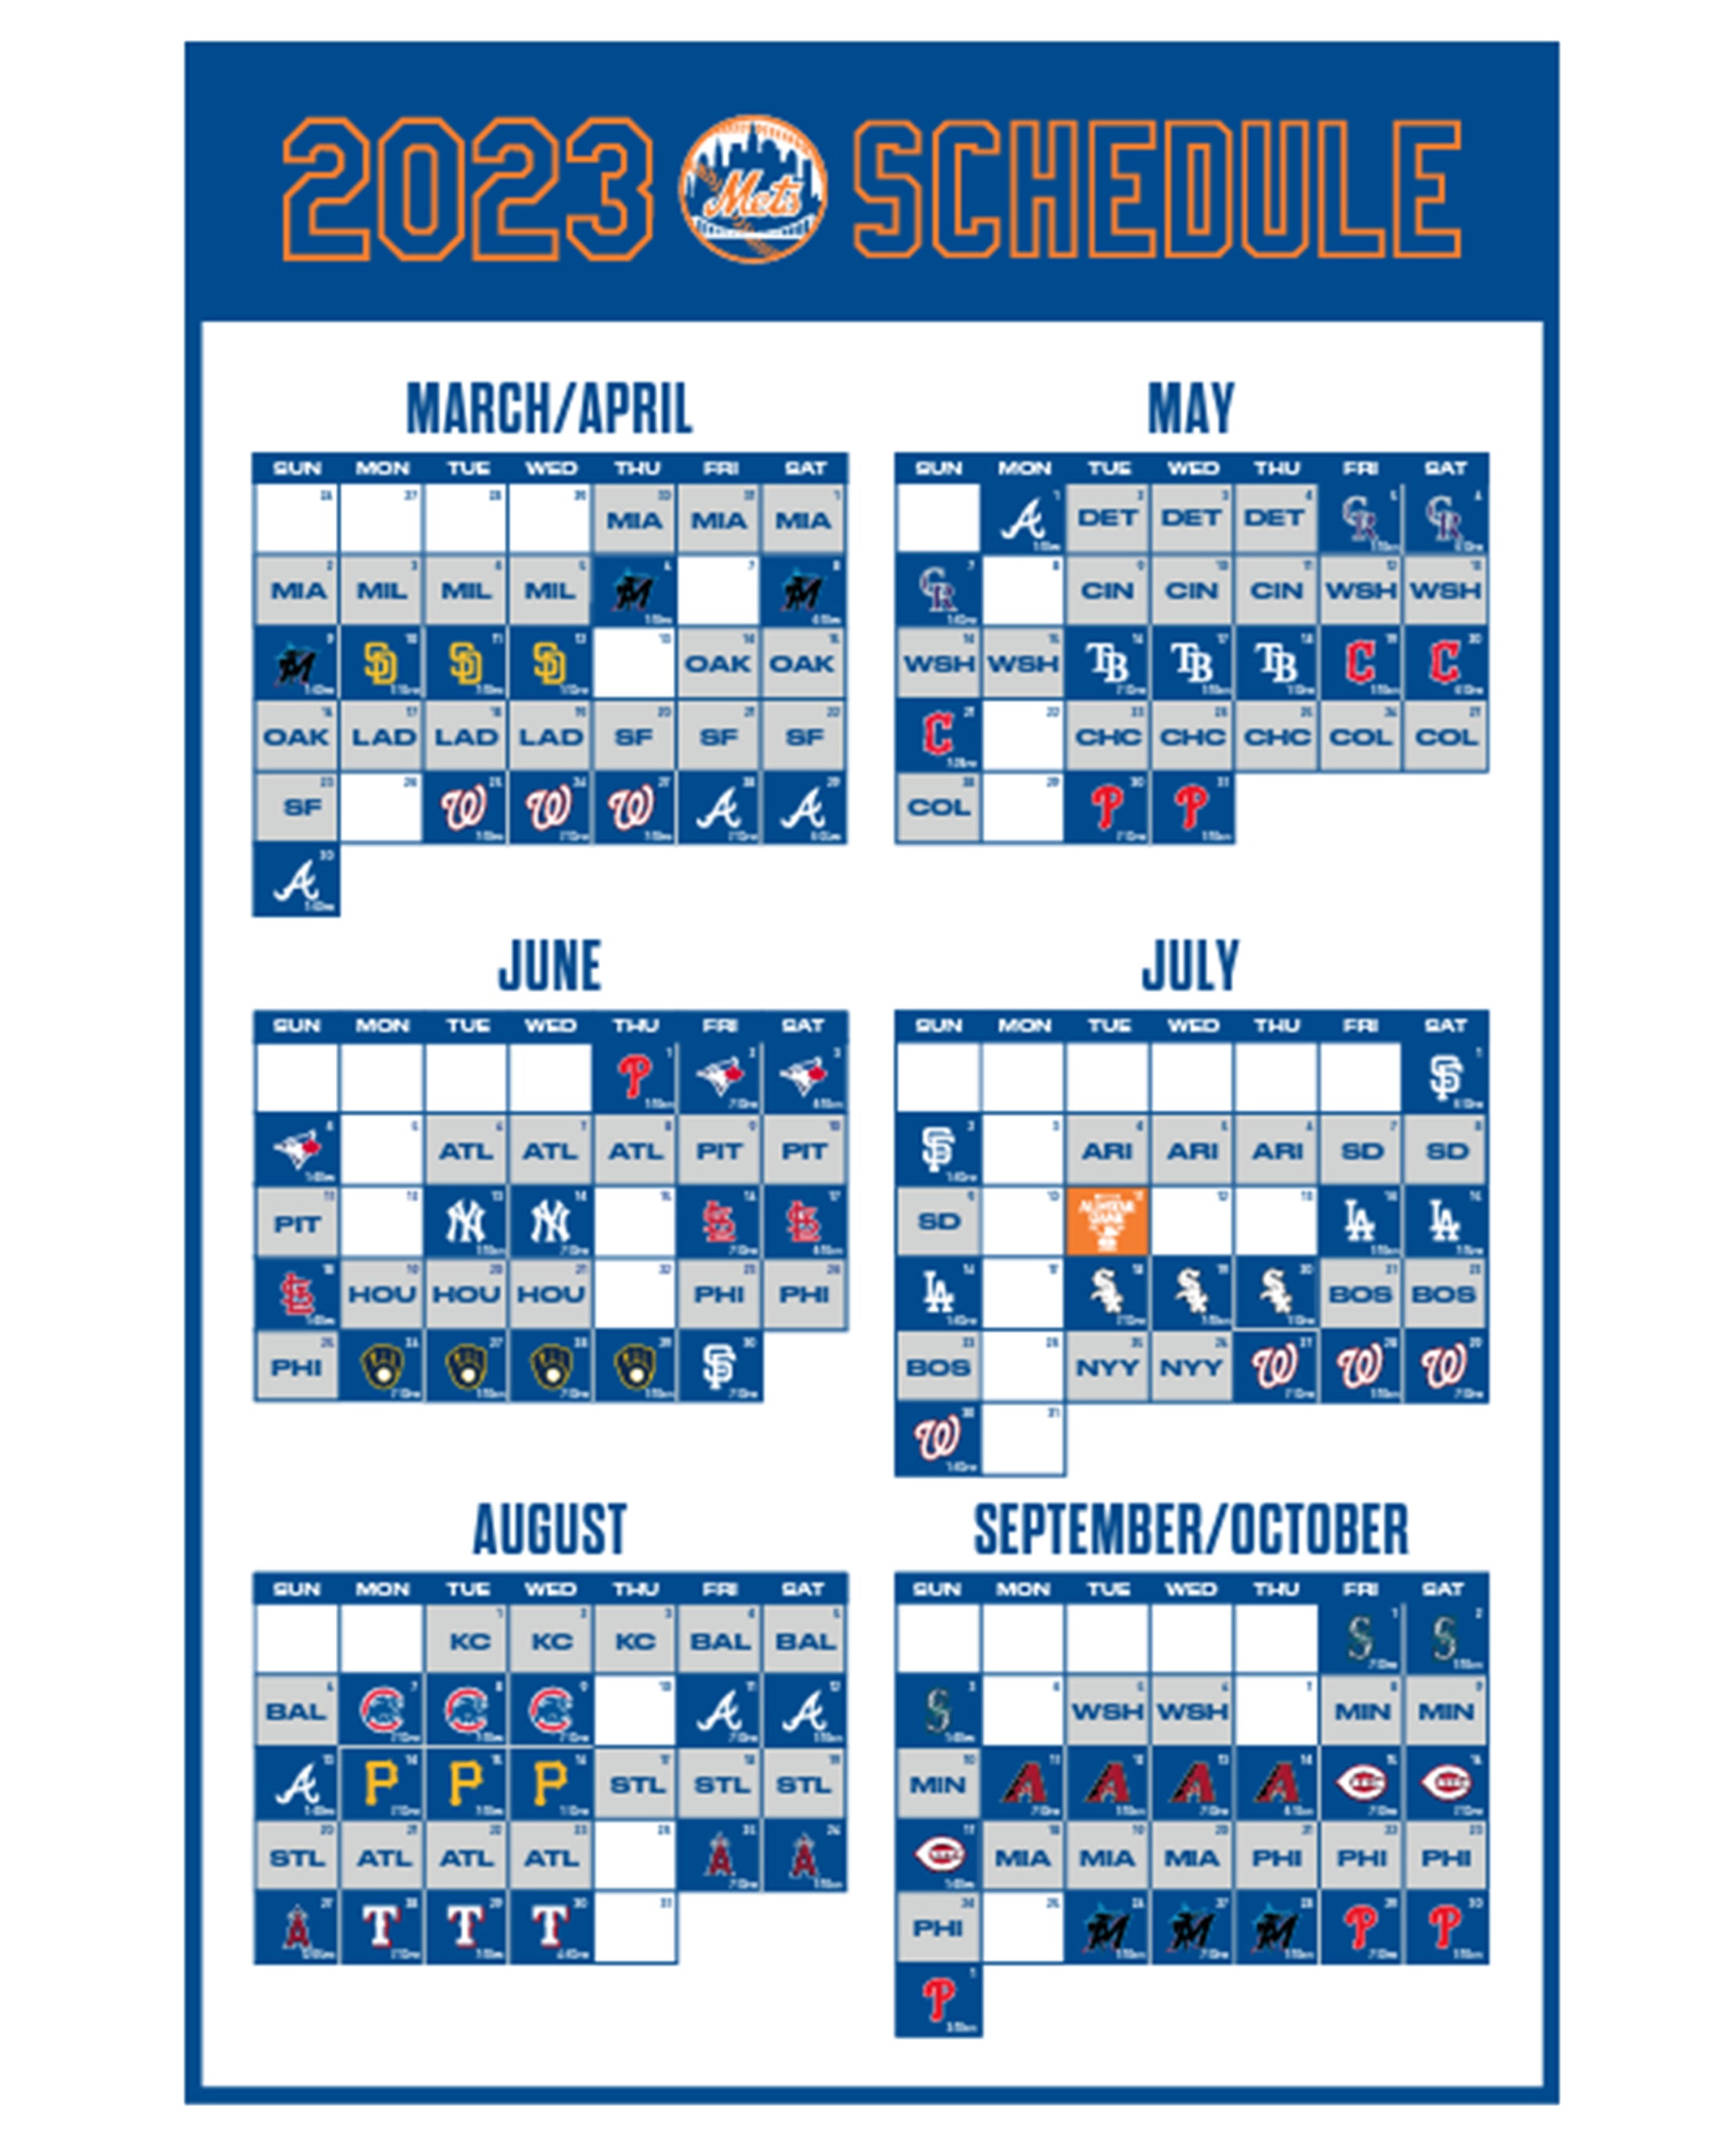 Printable Mets Schedule Find Out The Dates, Opponents, And Times Of